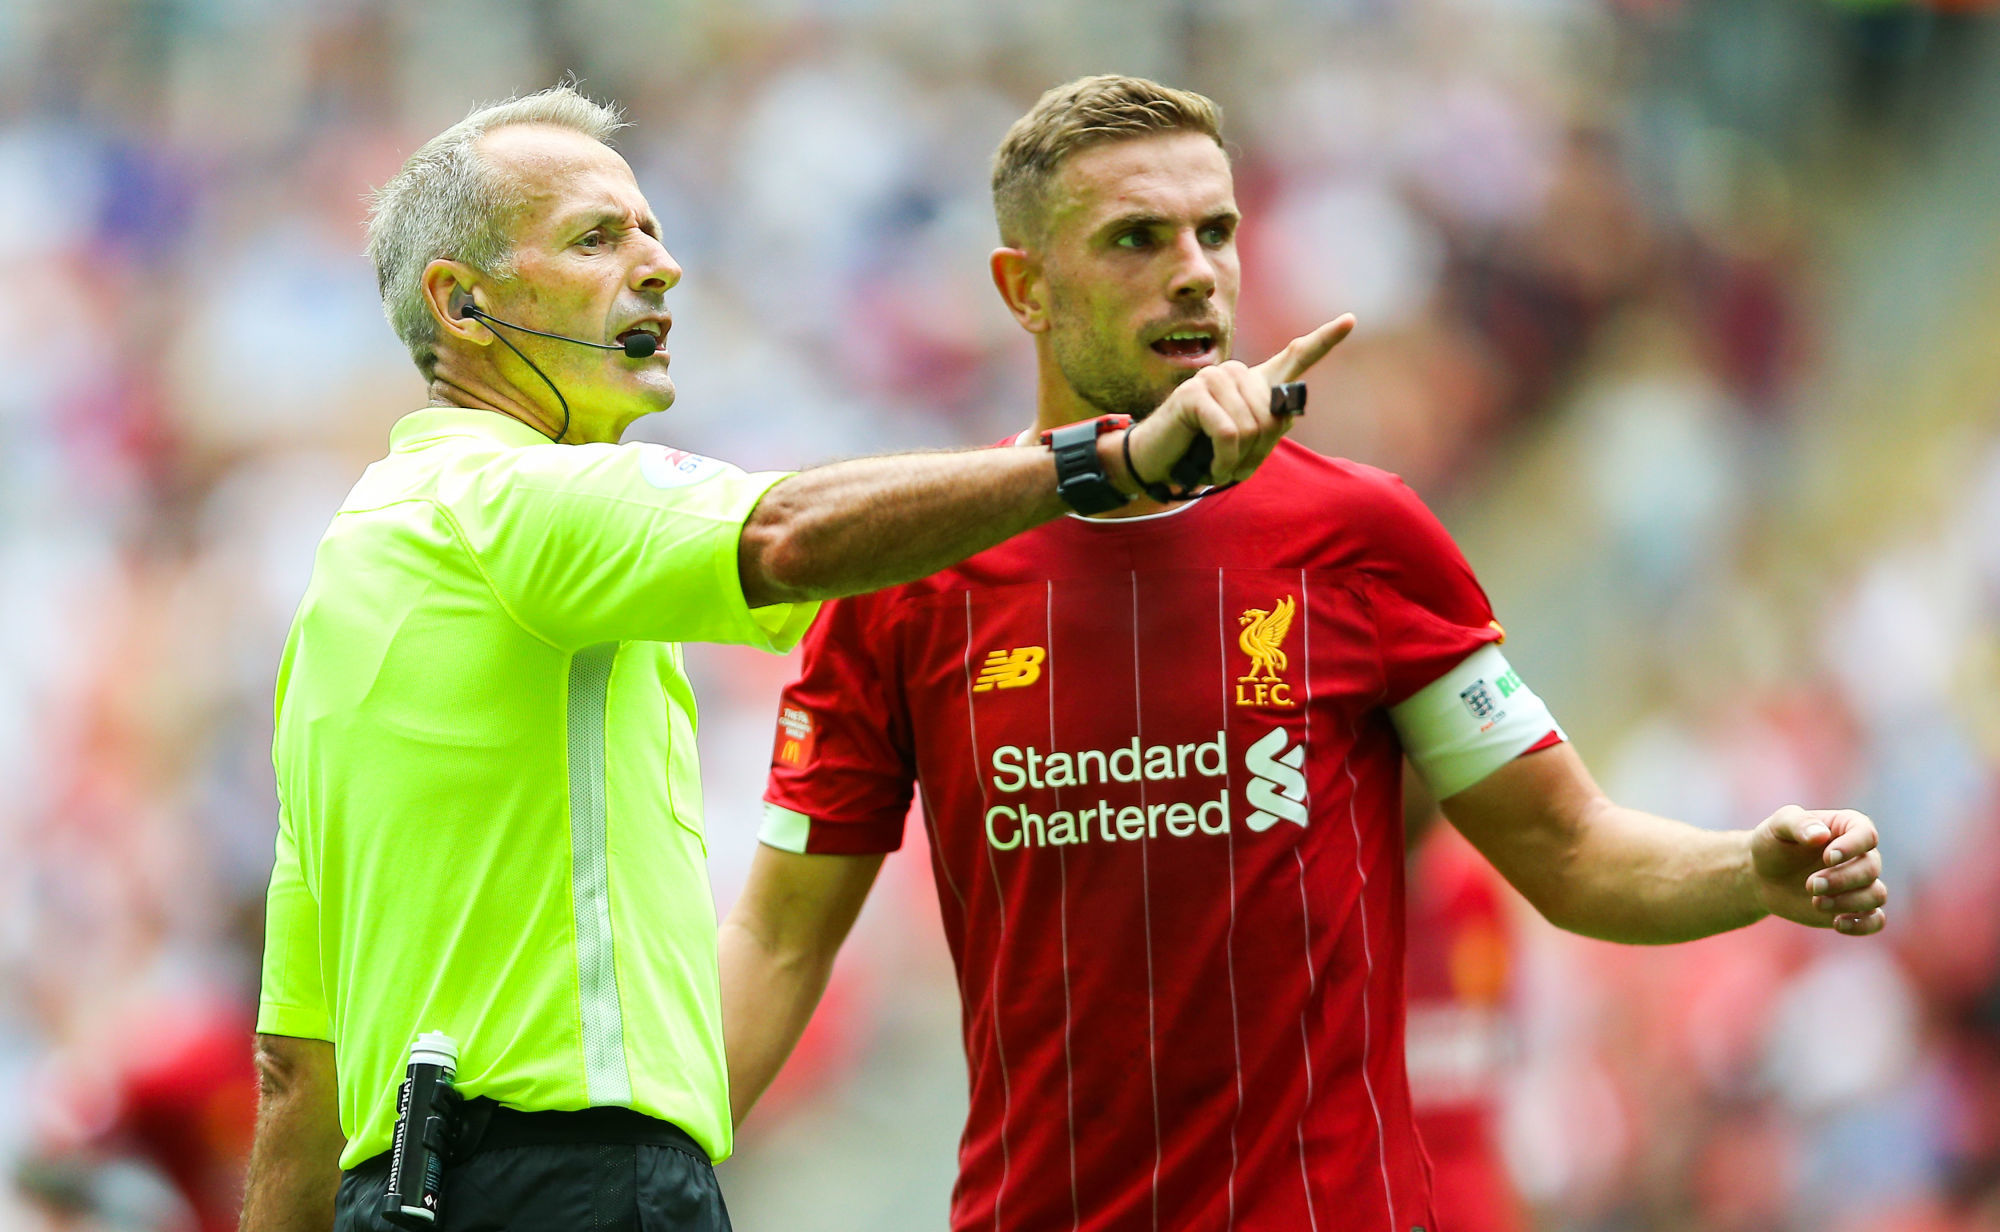 Liverpool's Jordan Henderson (right) appeals to match referee Martin Atkinson for a VAR decision during the Community Shield match at Wembley Stadium, London. On August 4th, 2019. Photo : PA Images / Icon Sport